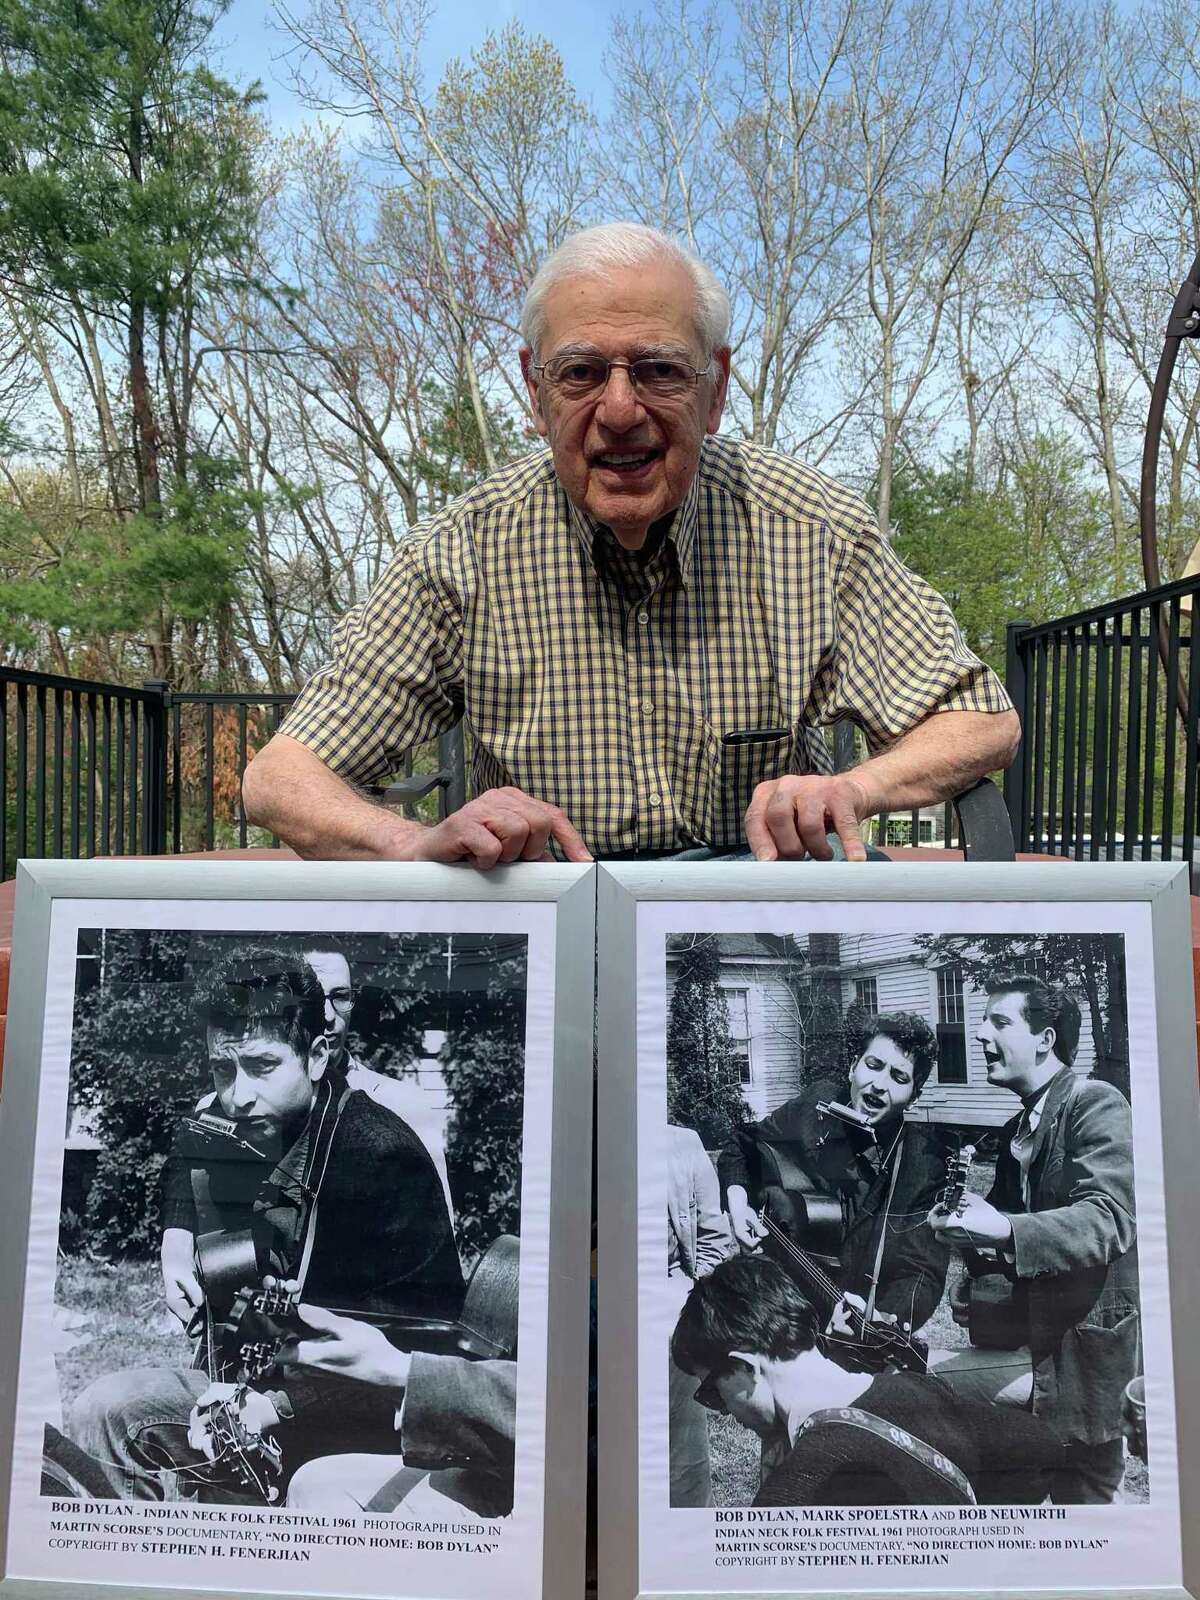 Stephen H. Fenerjian, 87, shows off two of the photographs he took of Bob Dylan at the 1961 Indian Neck Folk Festival in Branford when Fenerjian was 27. The photo of Fenerjian was taken by his son, Stephen M. Fenerjian, also known as Stephen Fenerjian Jr.